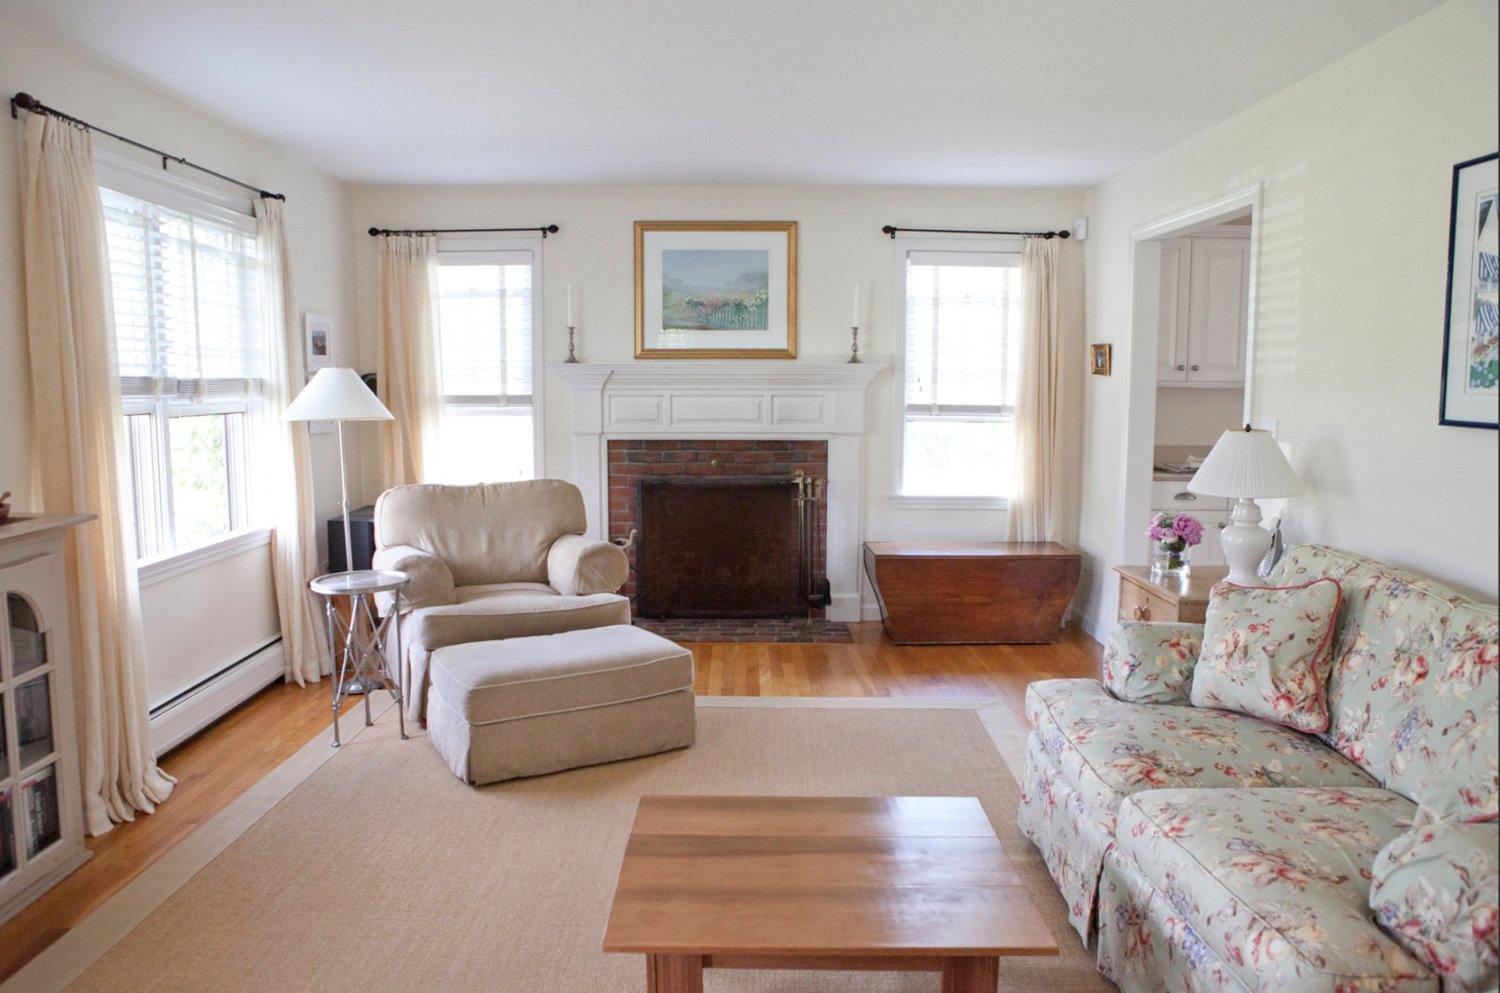 The first floor has a spacious, bright living room with a brick fireplace.